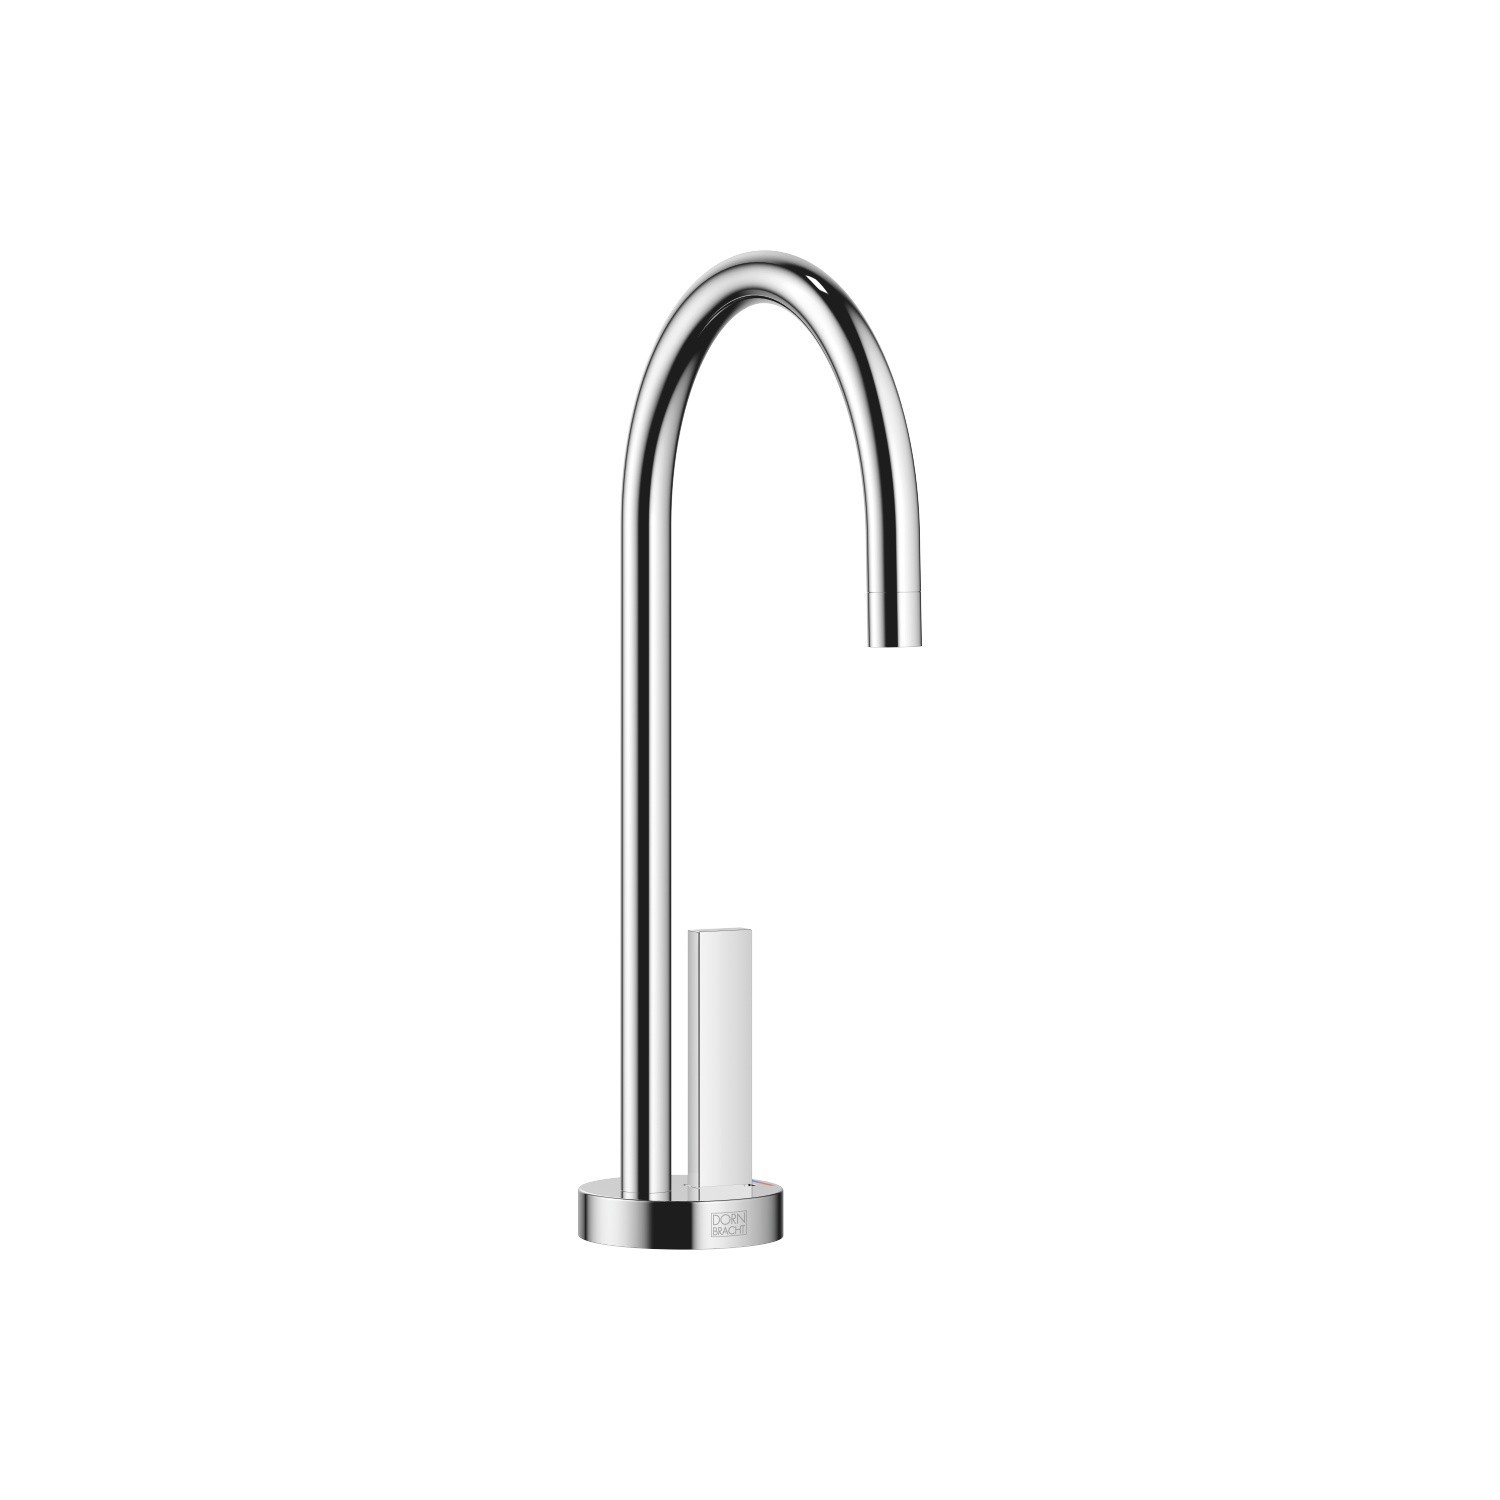 DORNBRACHT 17861875 TARA ULTRA SINGLE HOLE DECK MOUNT HOT AND COLD WATER DISPENSER WITH LEVER HANDLE